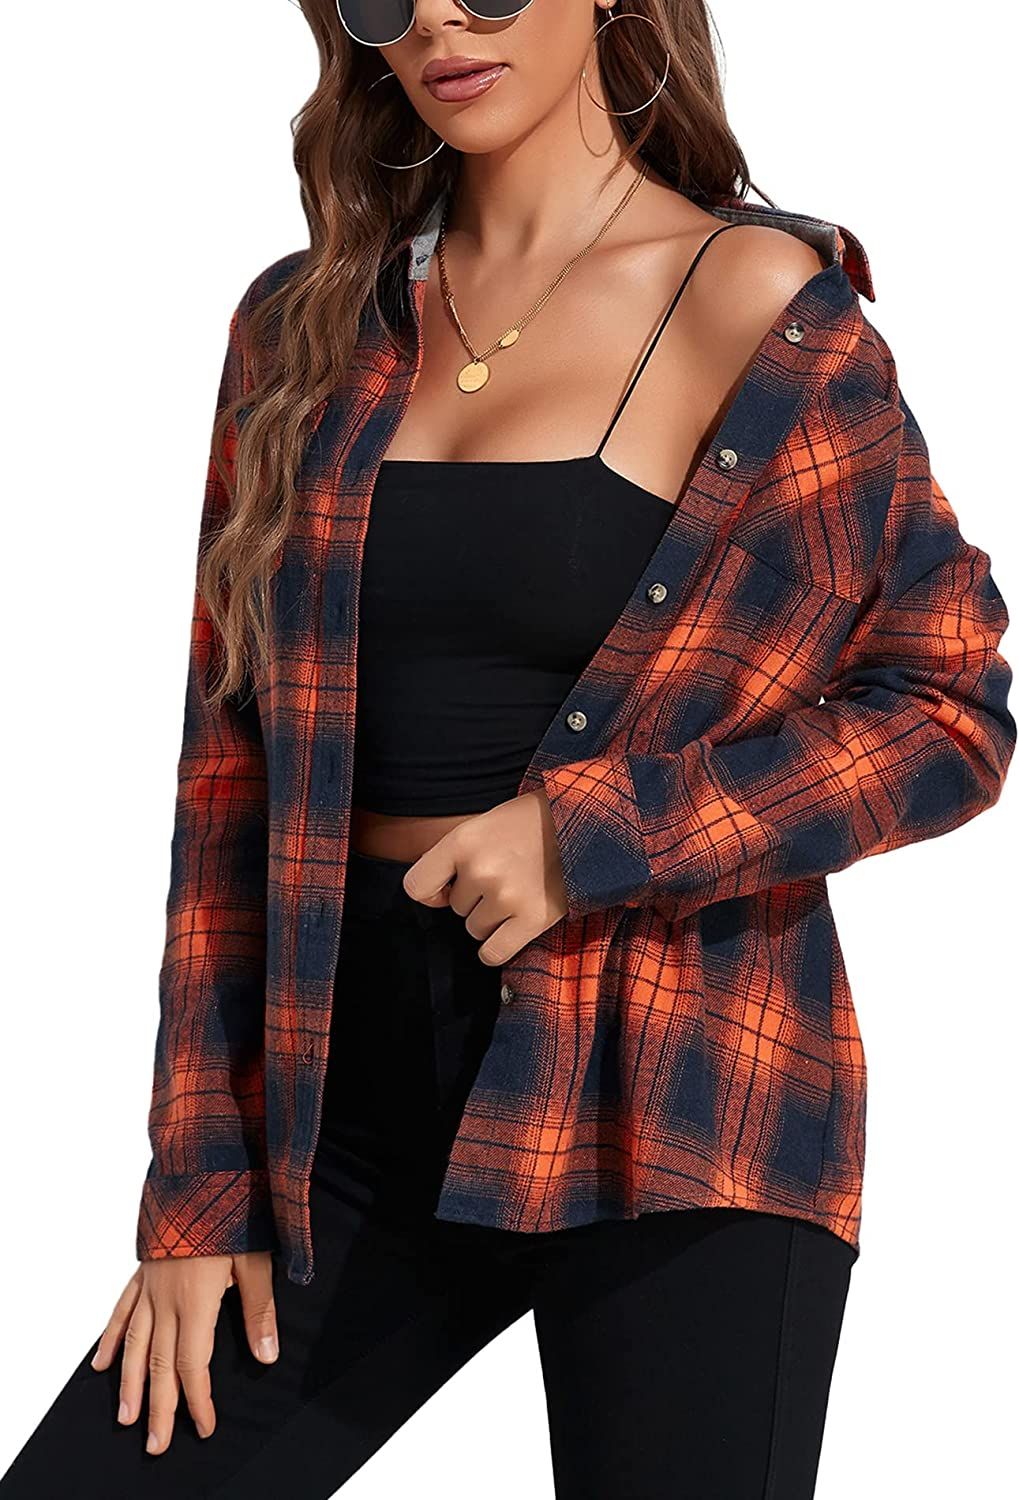 KevaMolly Plaid Long Sleeve Flannel Shirts for Women Loose Fit Boyfriend Button Down Shirt Casual... | Amazon (US)